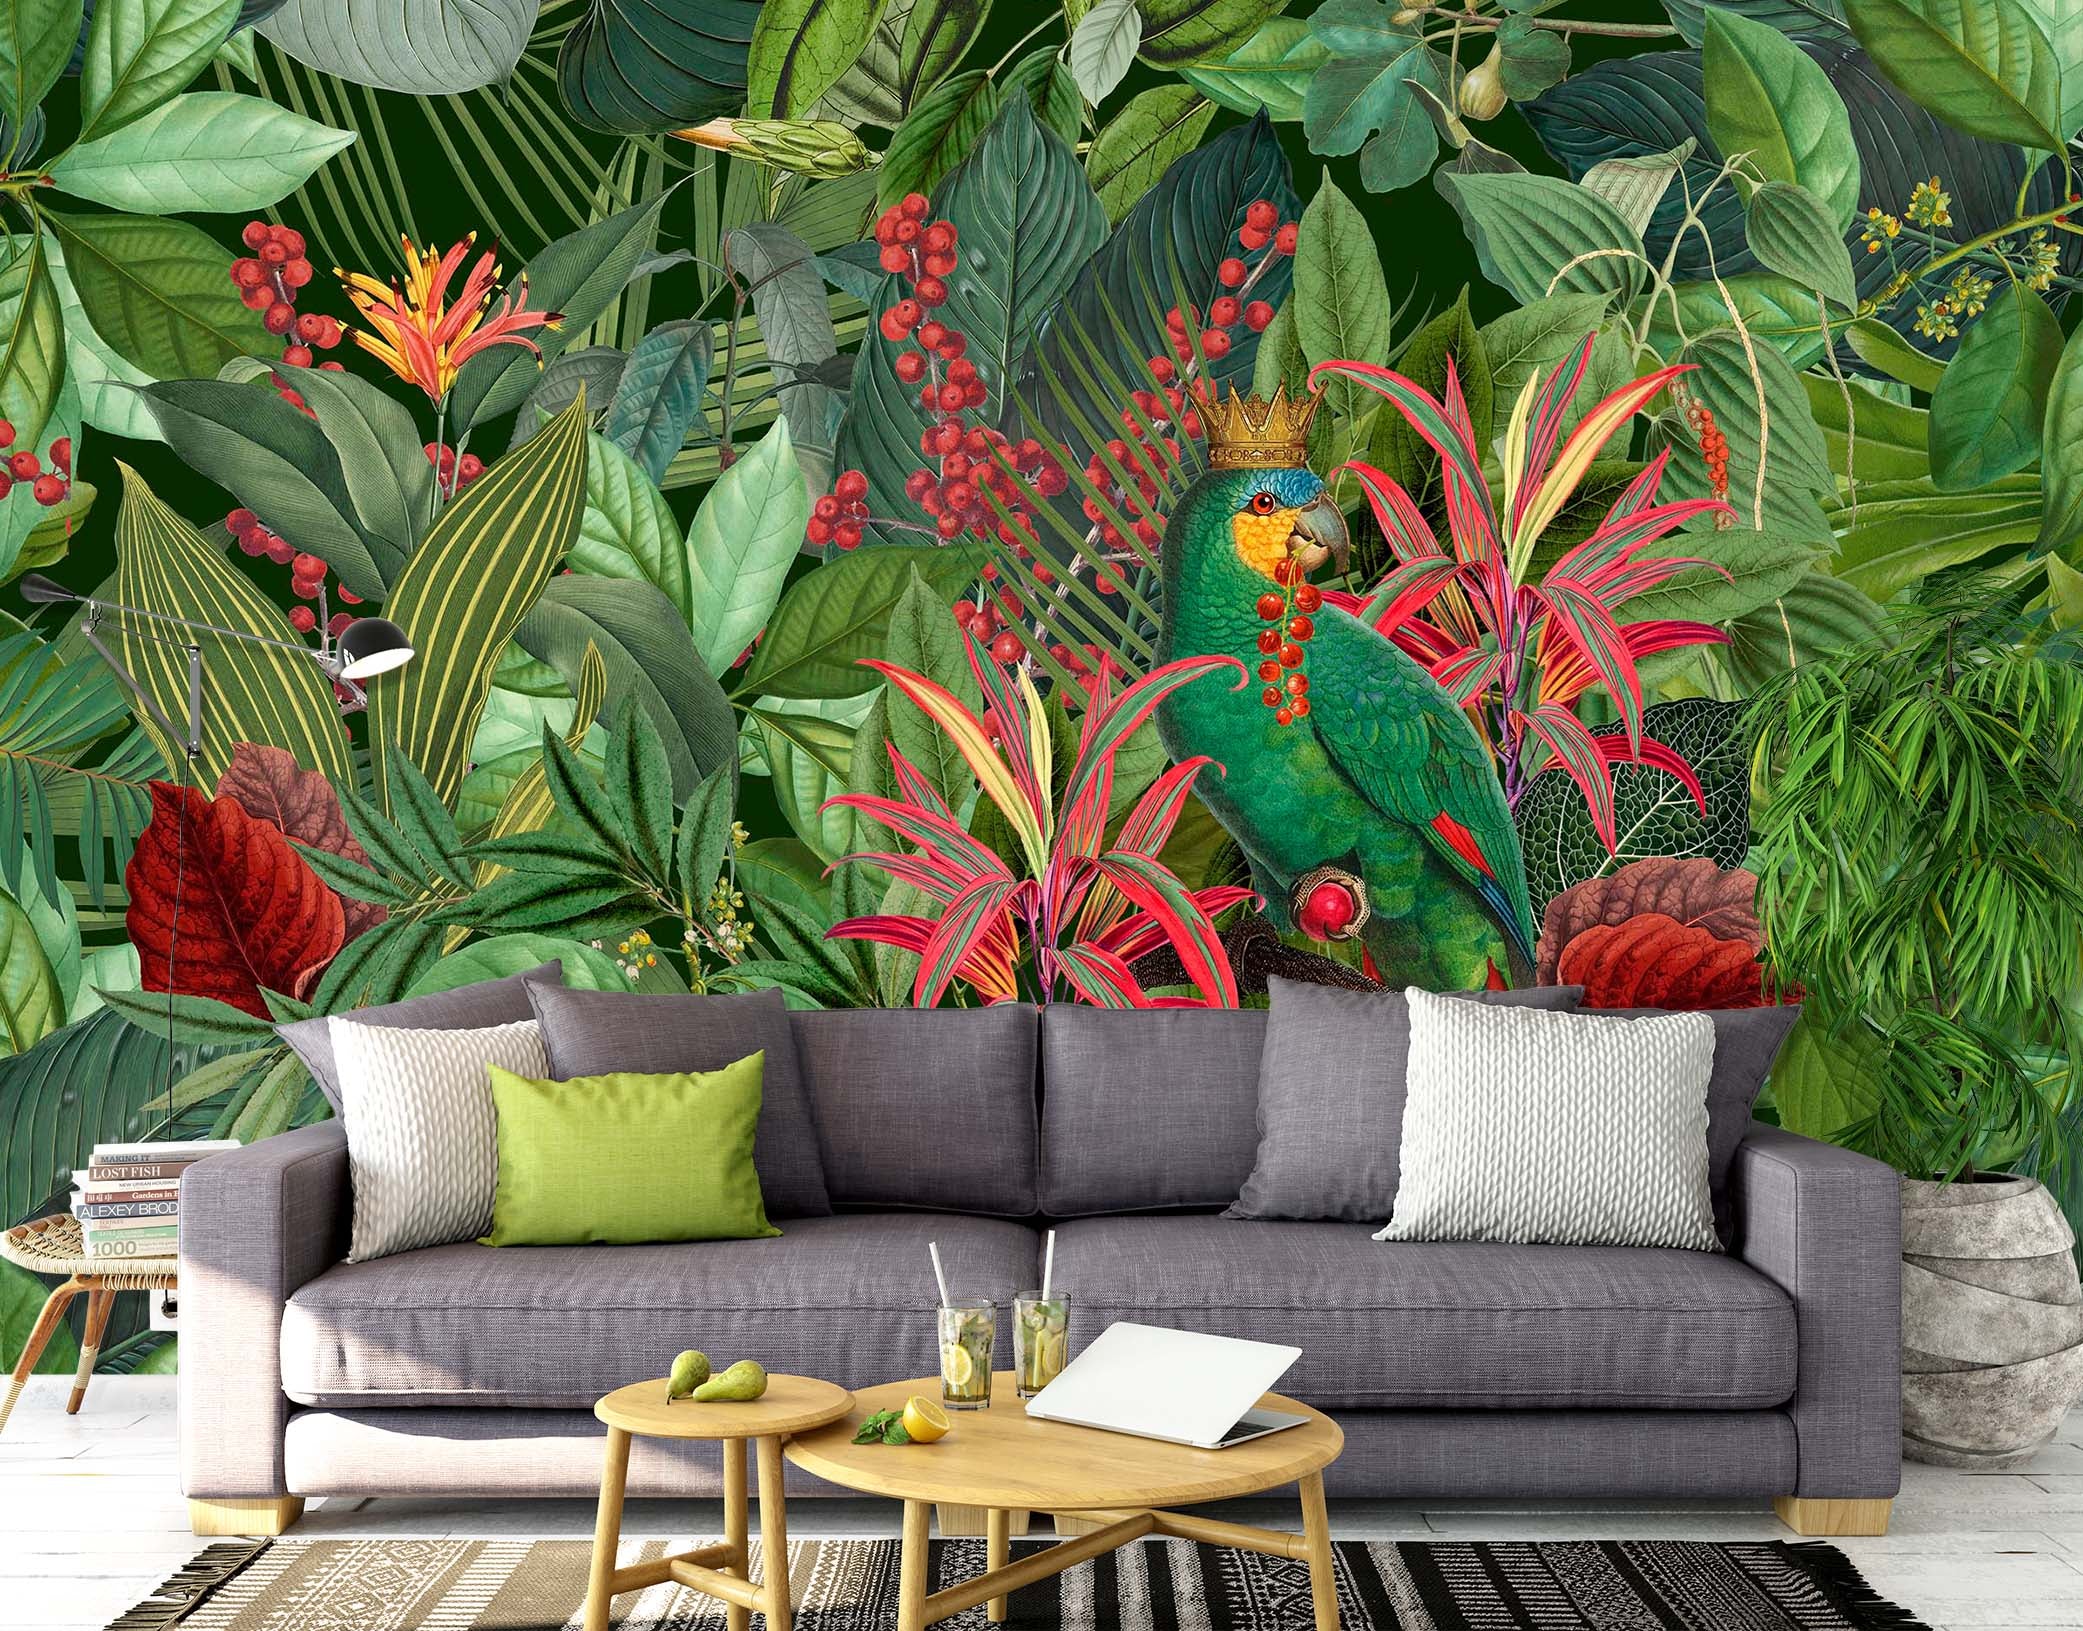 3D Forest Flowers 1002 Andrea haase Wall Mural Wall Murals